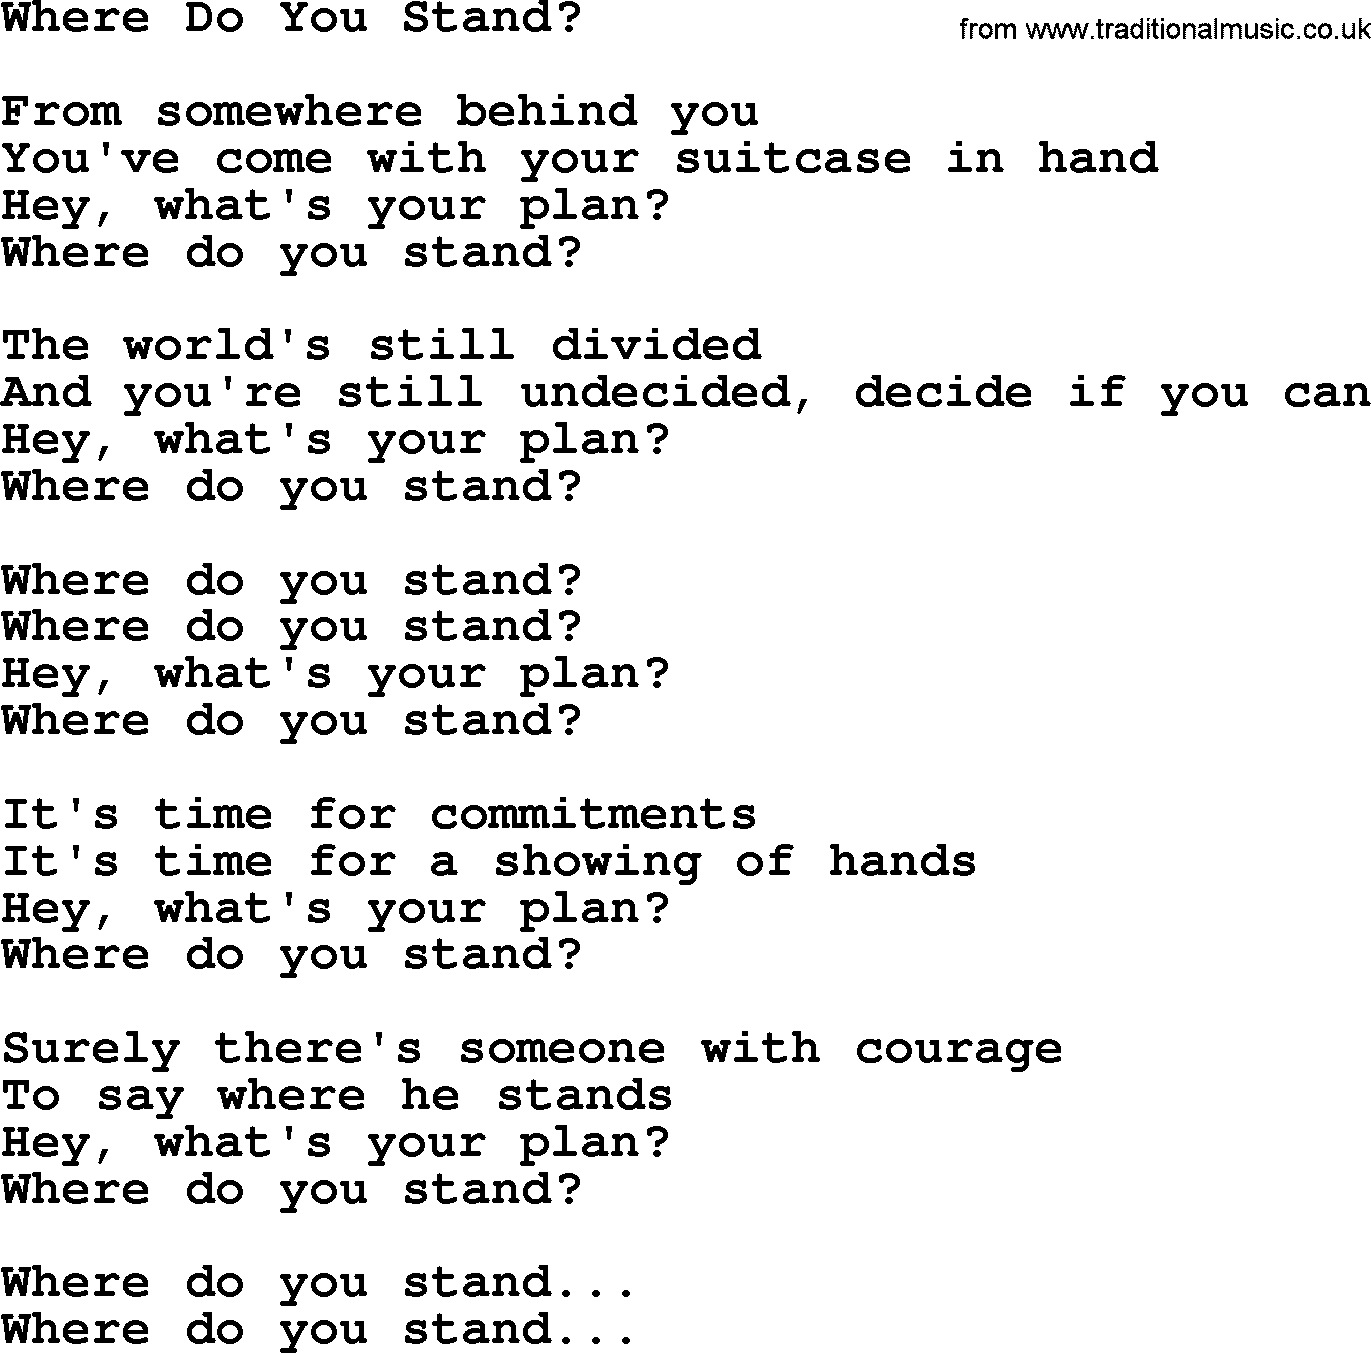 Willie Nelson song: Where Do You Stand_ lyrics